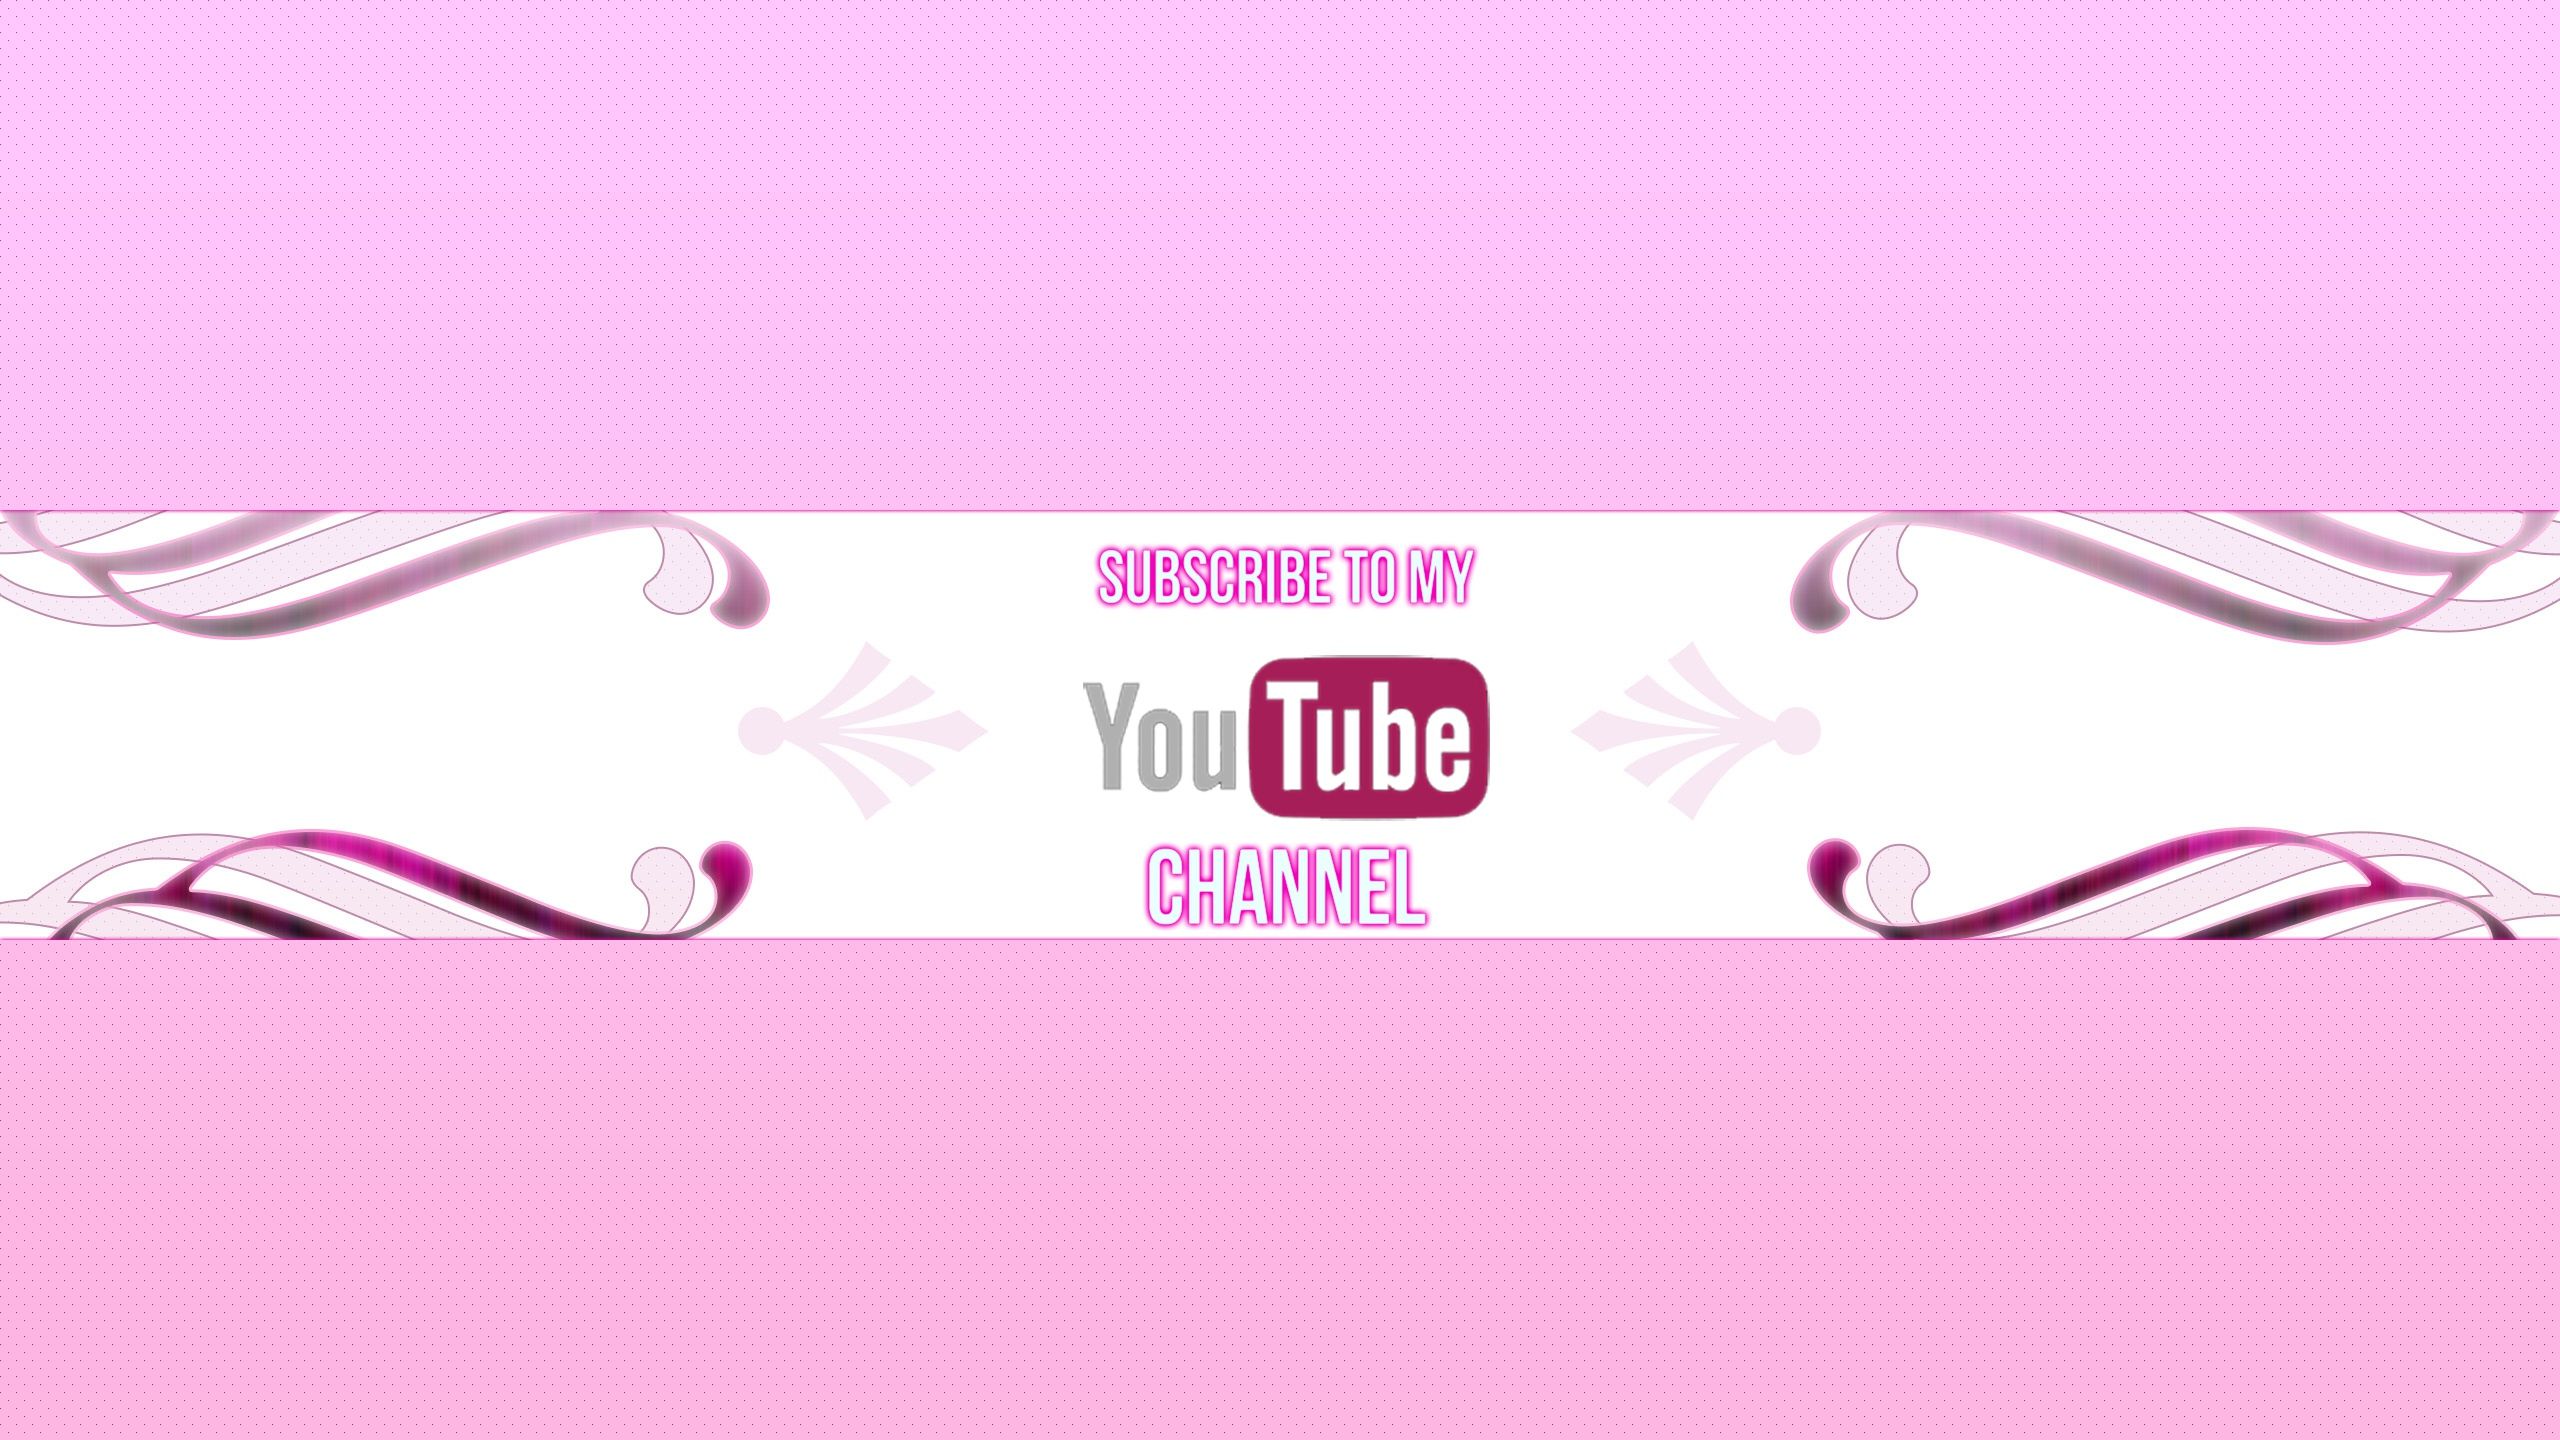 A pink YouTube banner with white text and a decorative border - YouTube